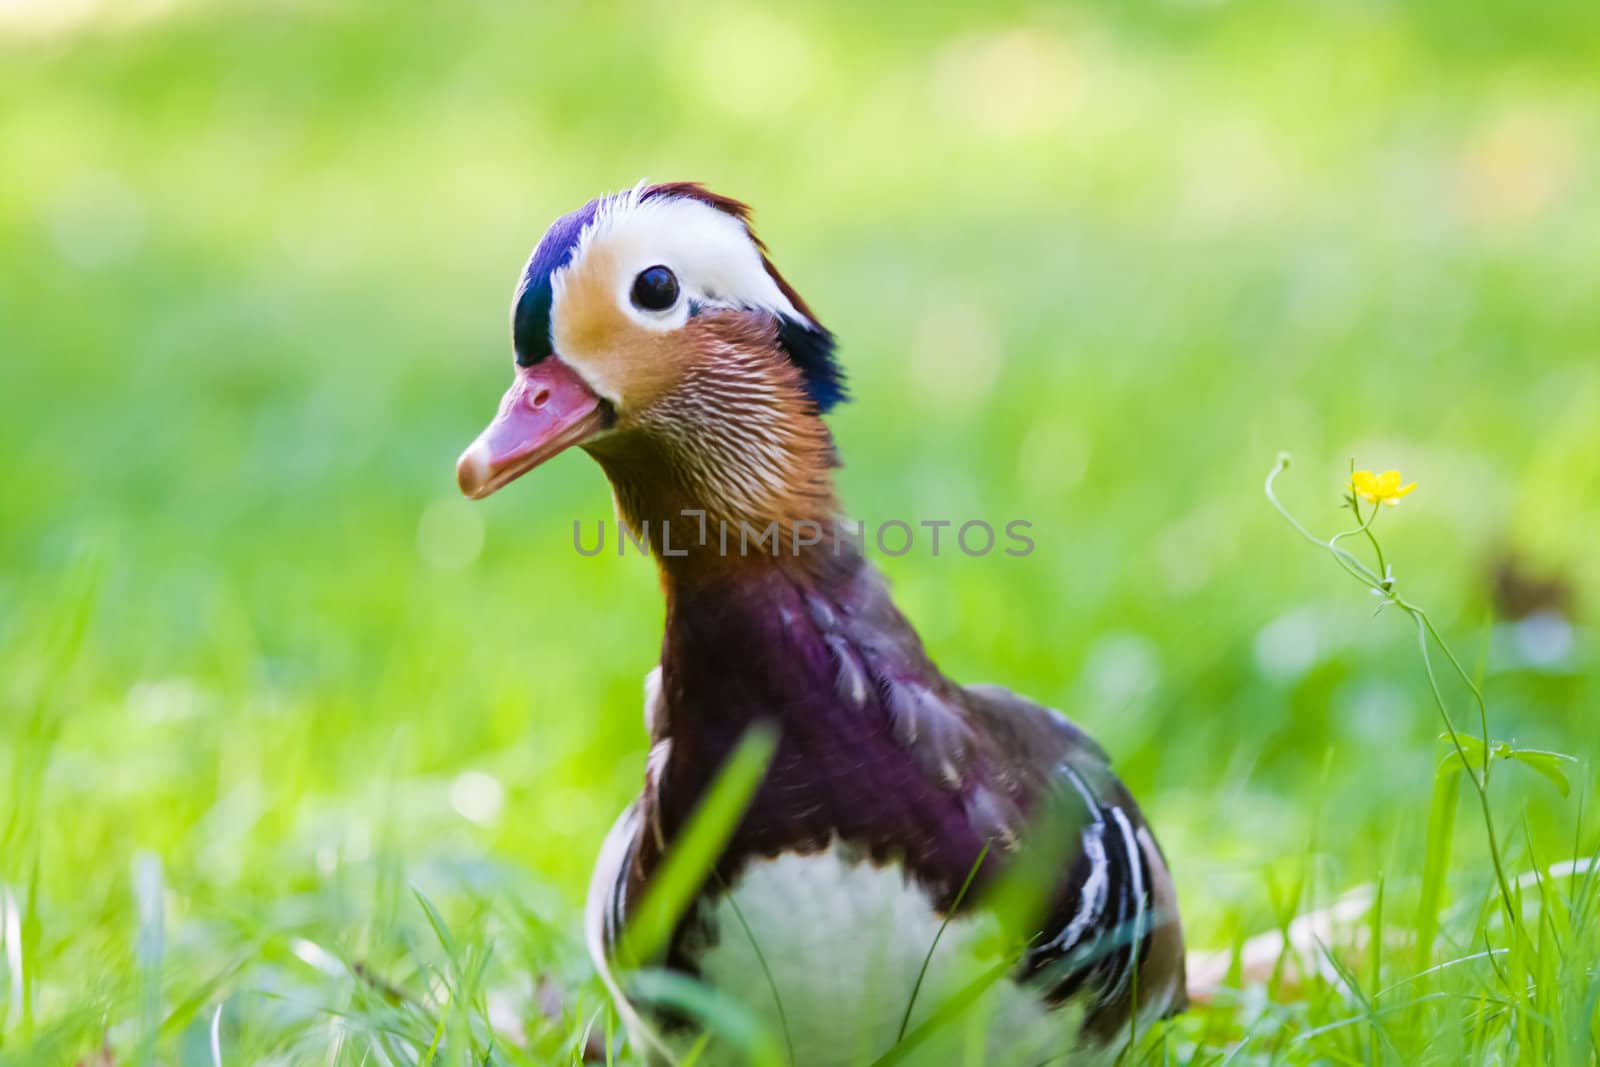 Mandarin duck in the grass looking curiously at the watcher